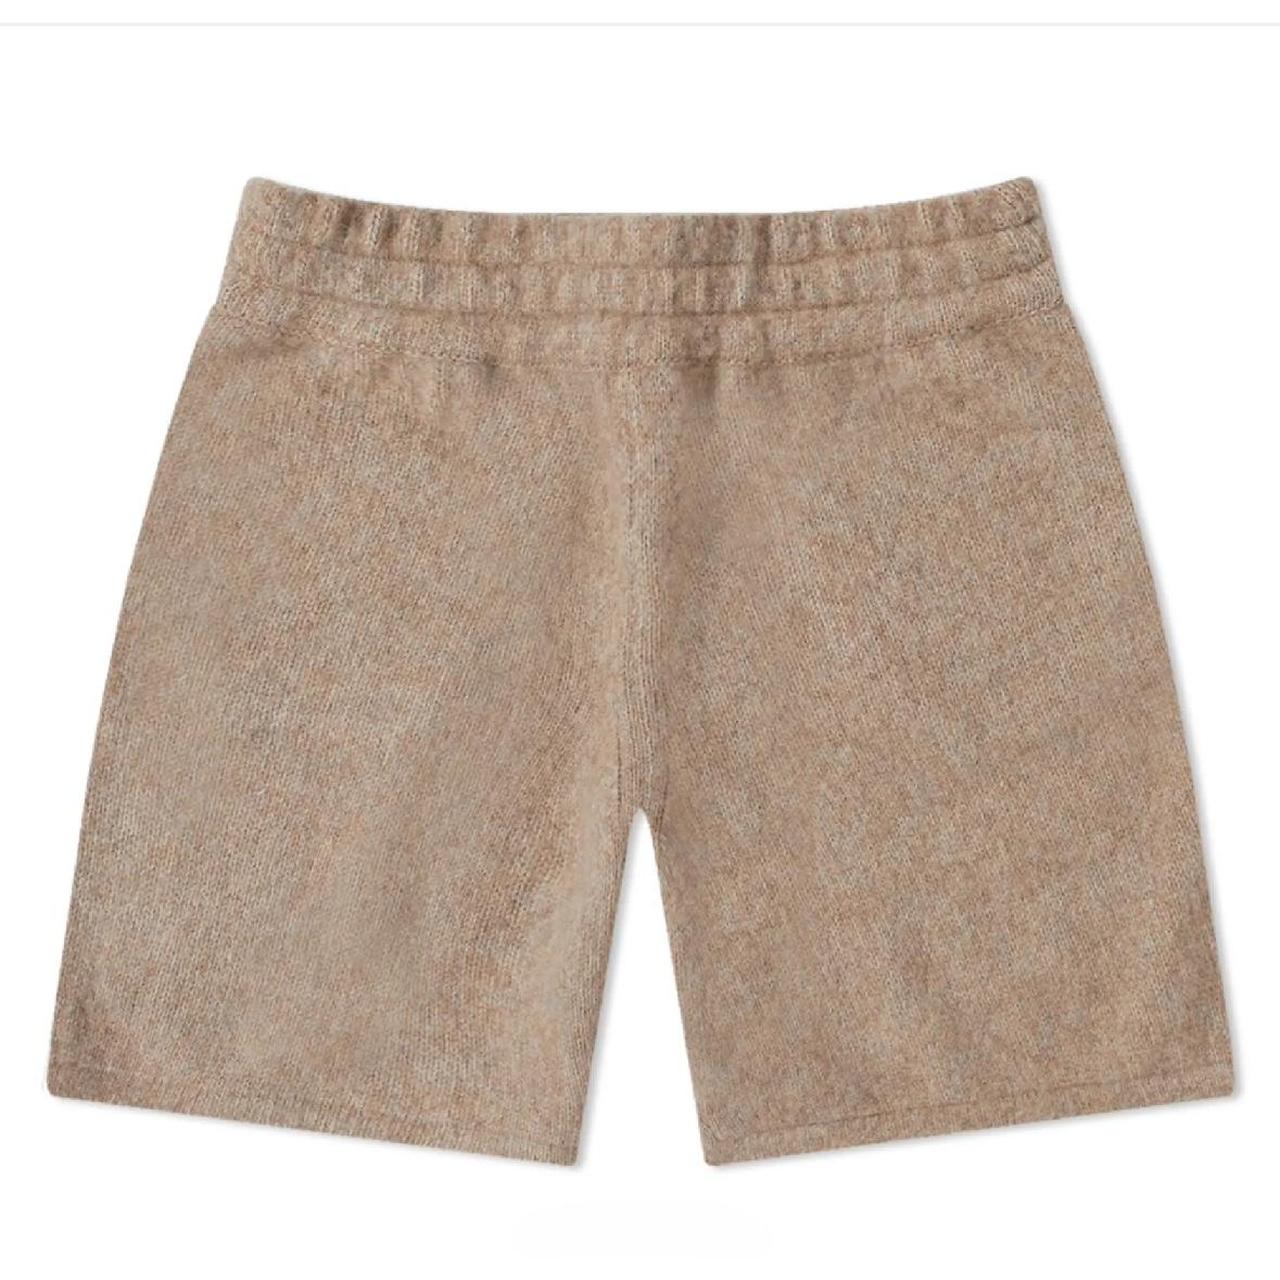 Cole buxton knit wool shorts in Tuscan super soft - Depop